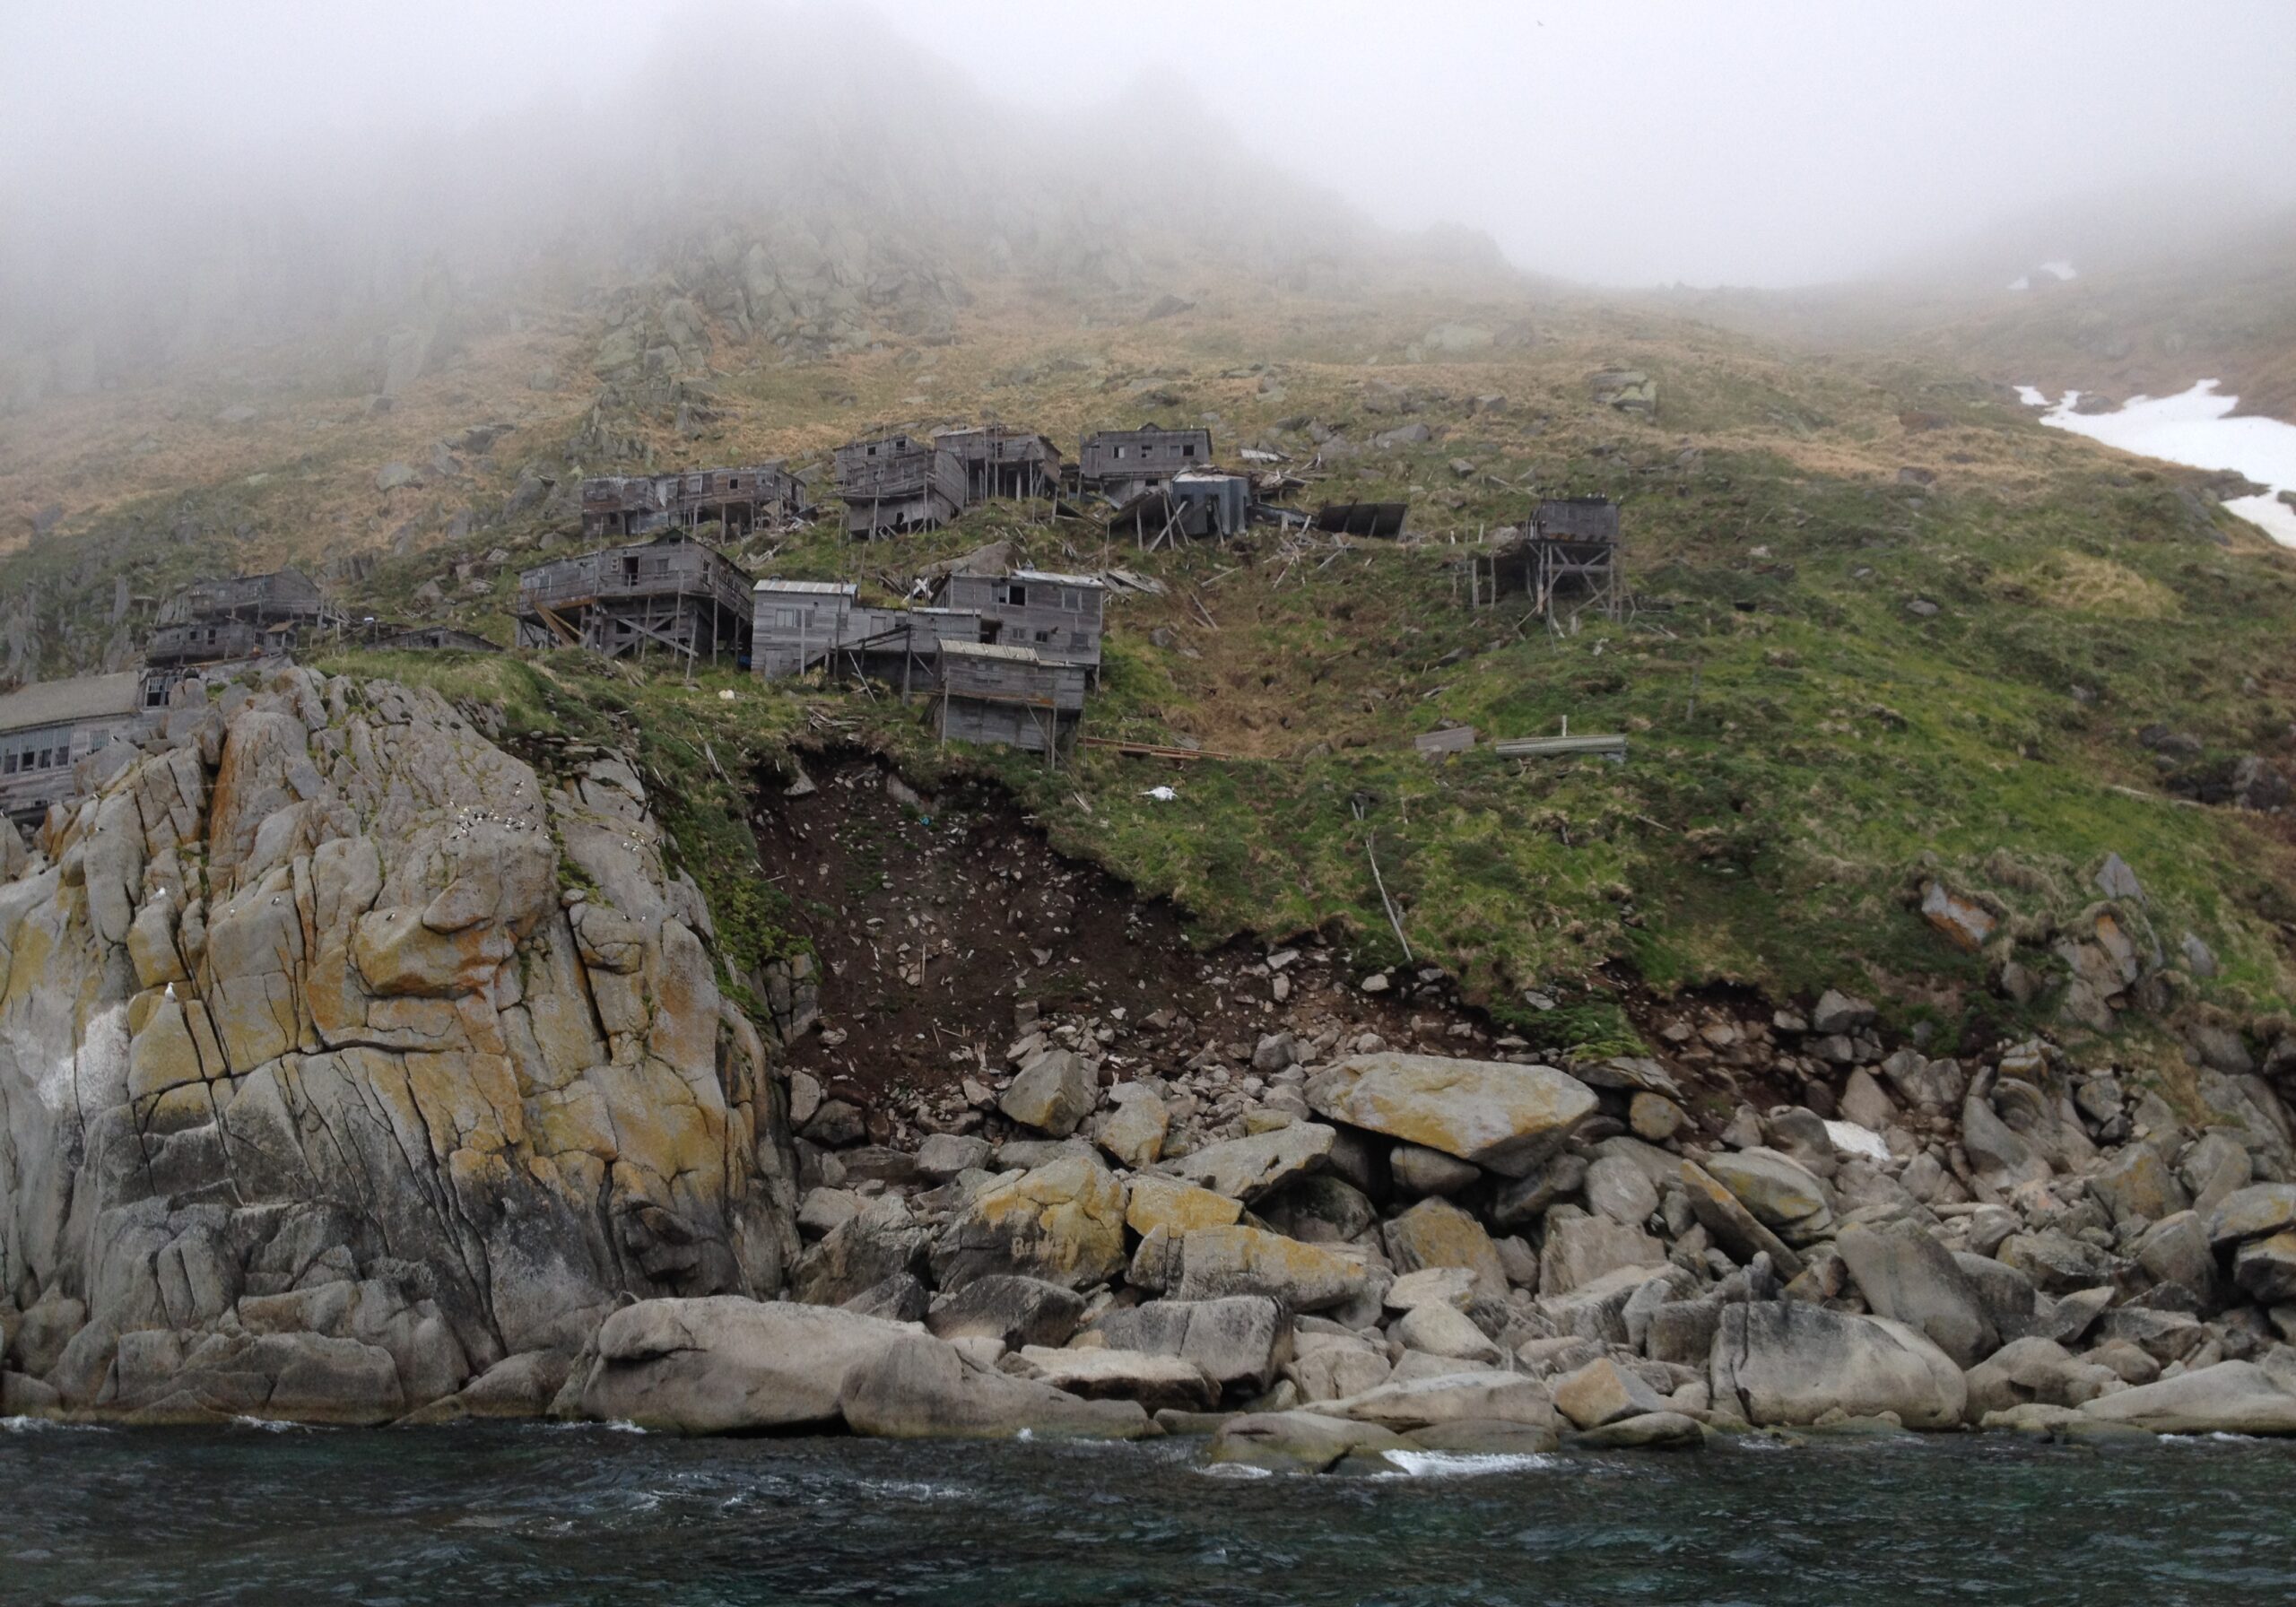 Craggy, grassy island cliff and shoreline, wrapped in mist